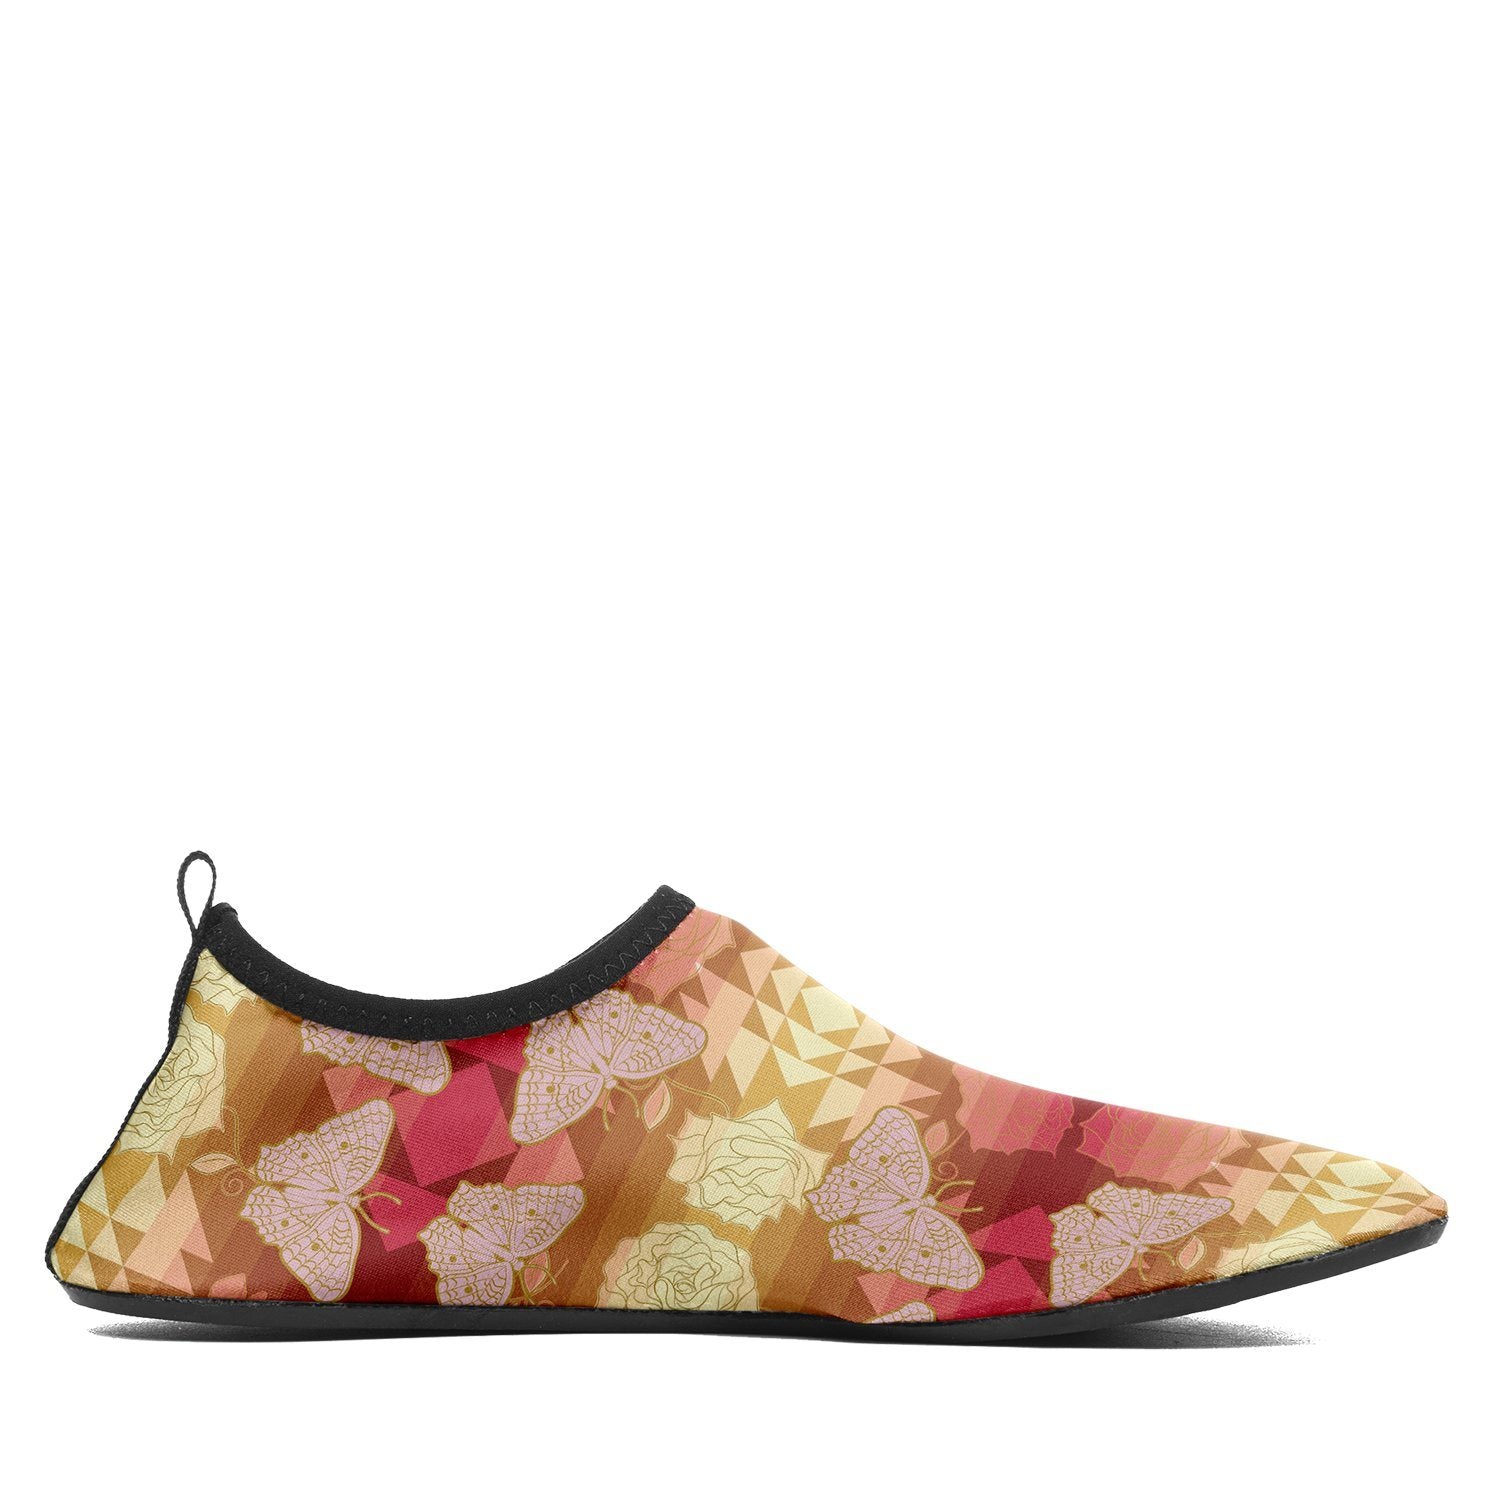 Butterfly and Roses on Geometric Sockamoccs Kid's Slip On Shoes Herman 